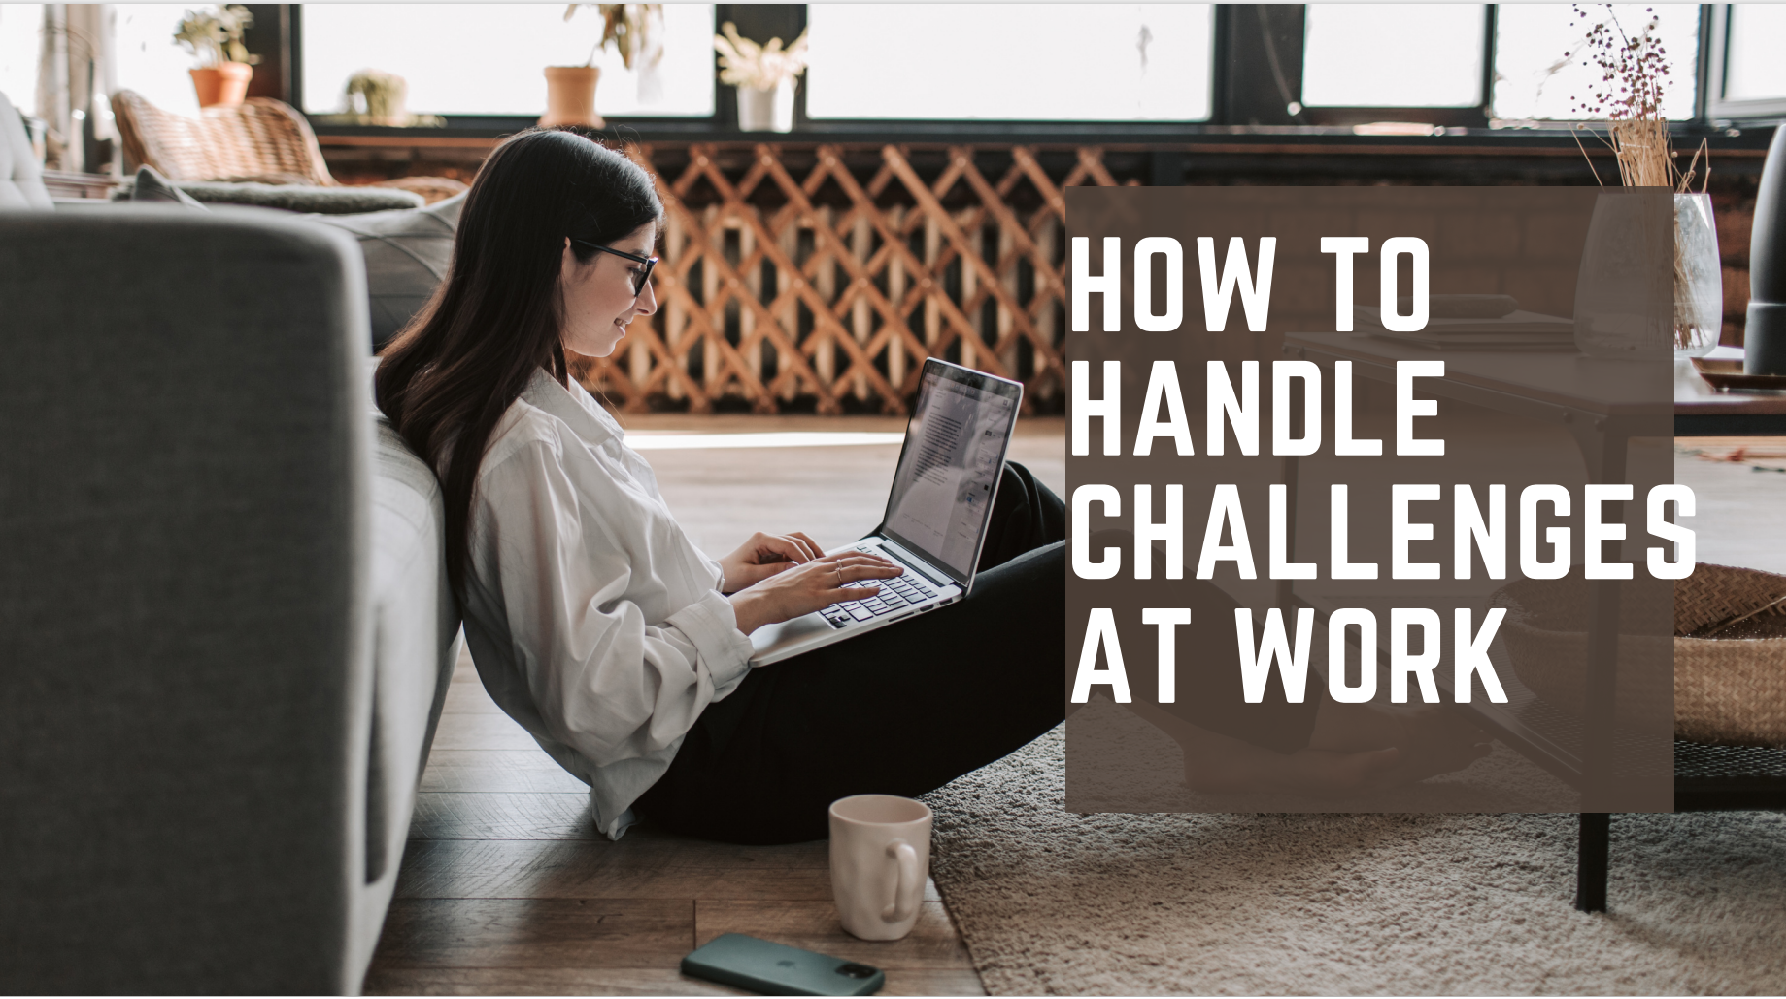 HOW TO HANDLE CHALLENGES AT WORK
